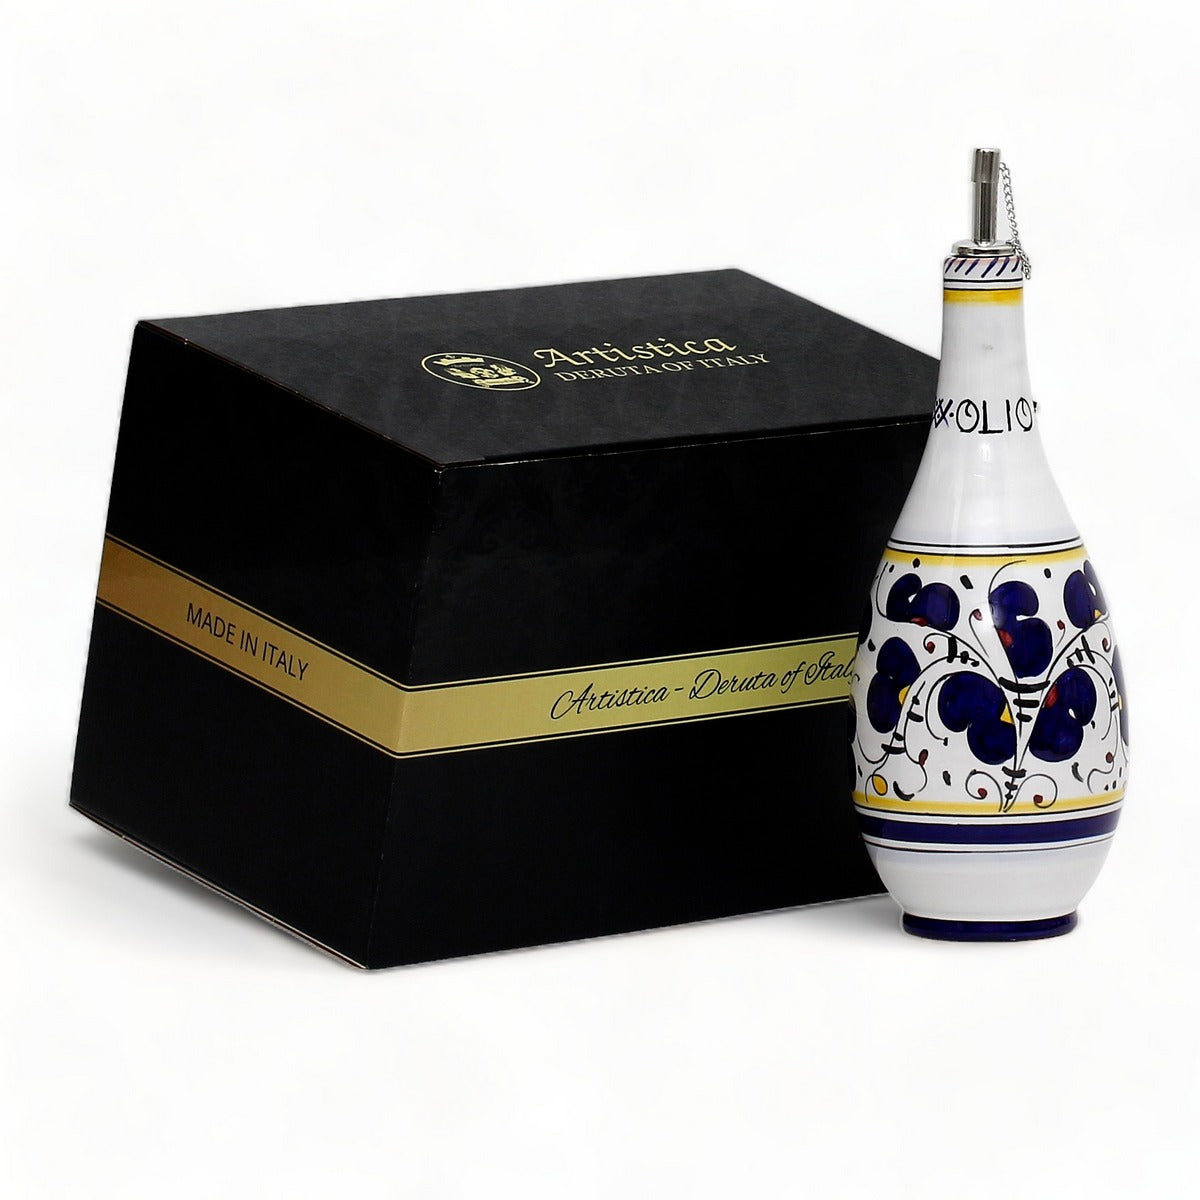 GIFT BOX: With authentic Deruta hand painted ceramic - OLIVE OIL DISPENSER BOTTLE Blue Rooster Design